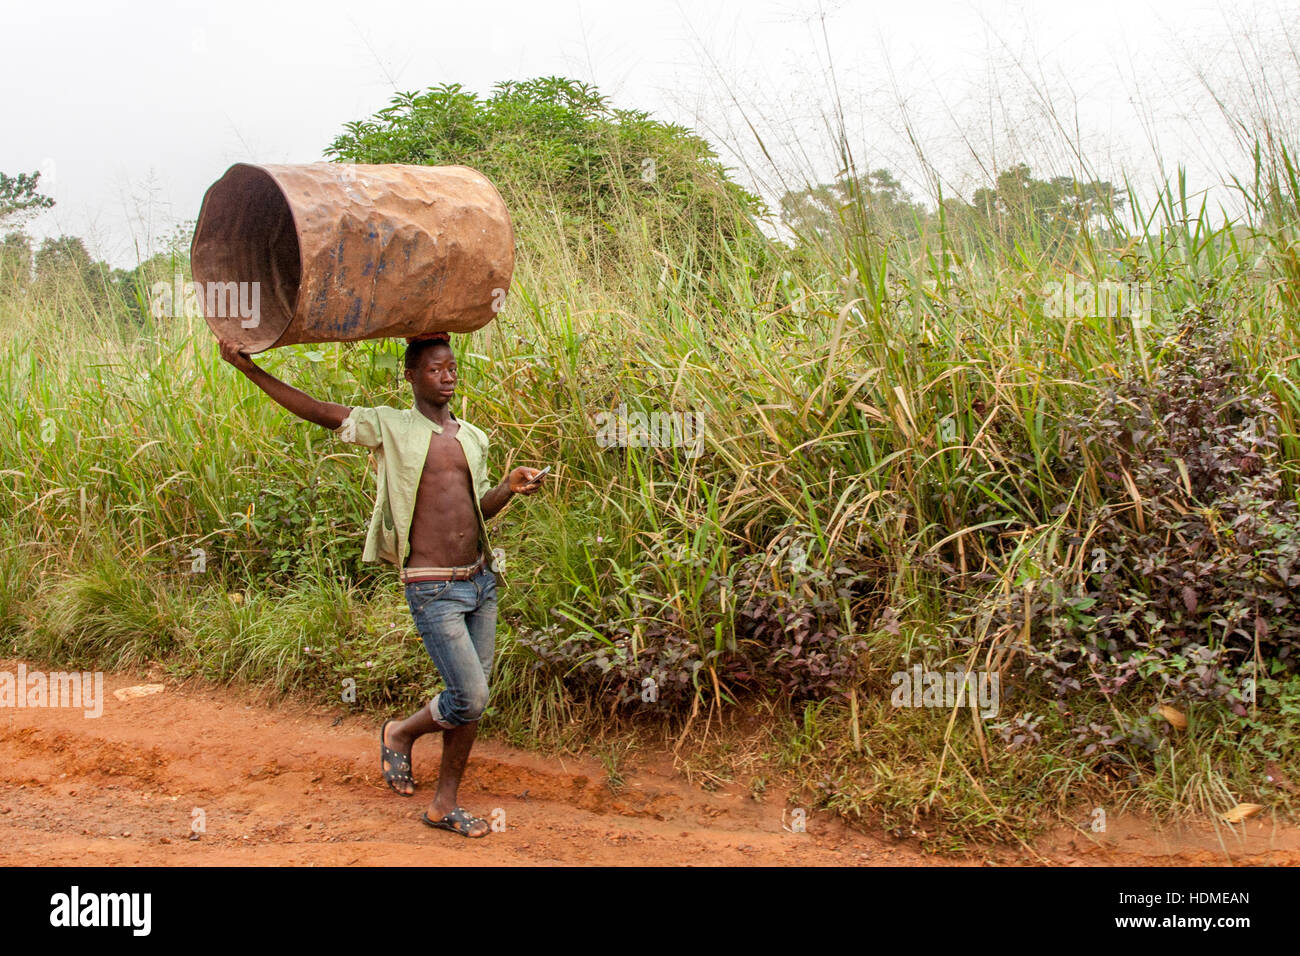 Sierra Leone Multitasking: Man carrying a Barrel on his head while using his smart phone. The oil barrel has come a long way in Africa and is still valuable despite its dents Stock Photo